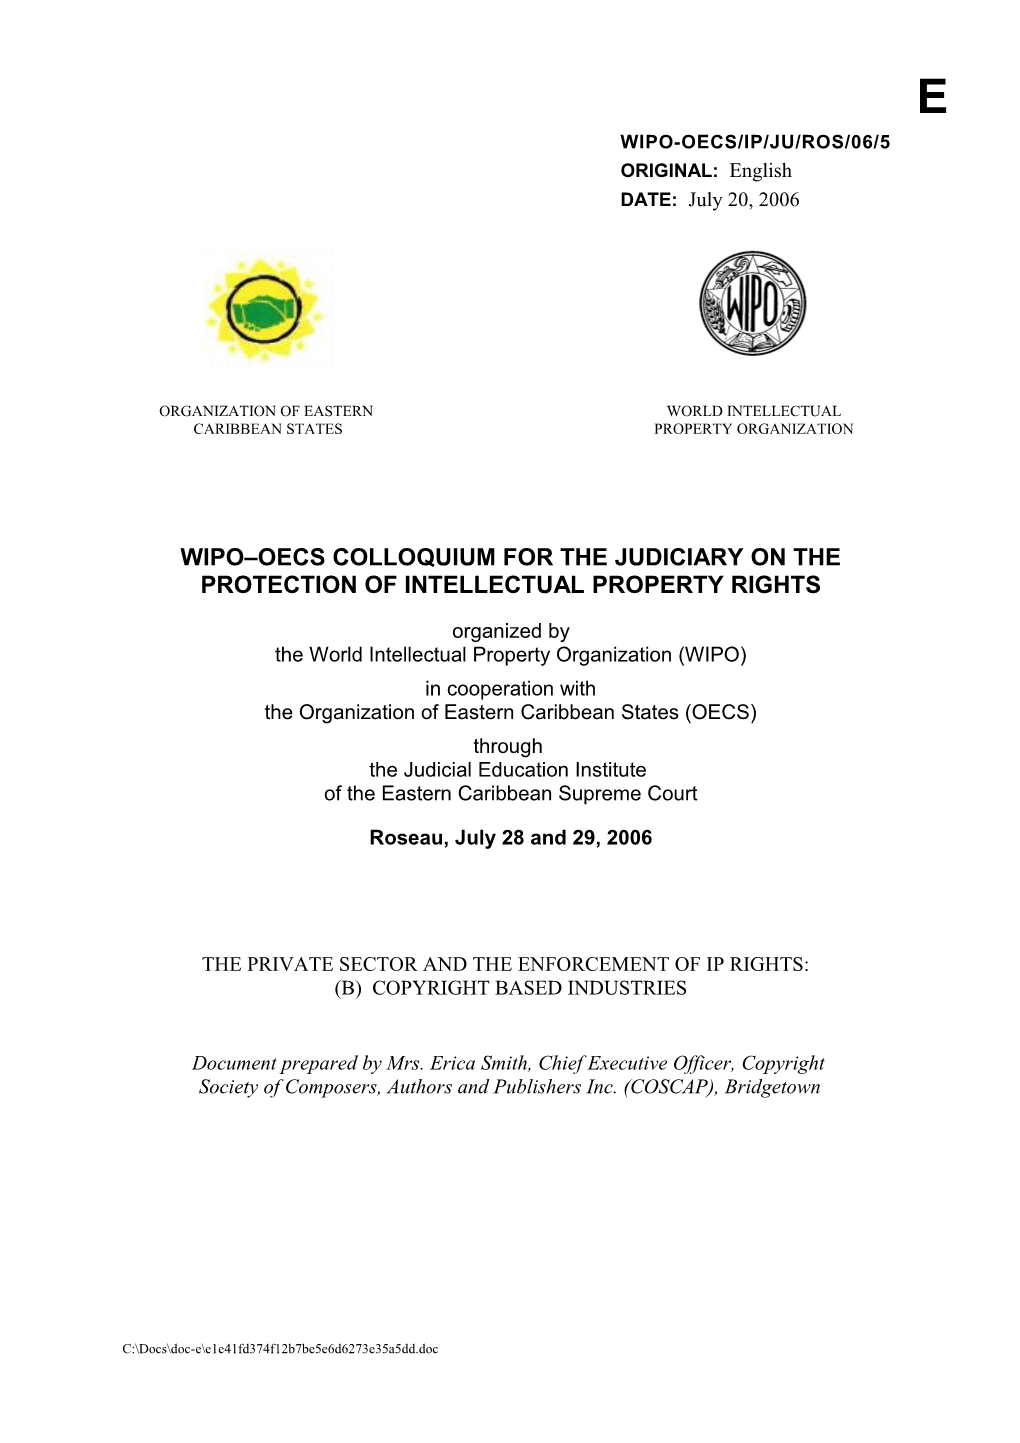 WIPO-OECS/IP/JU/ROS/06/5: the Private Sector and the Enforcement of IP Rights: (B) Copyright